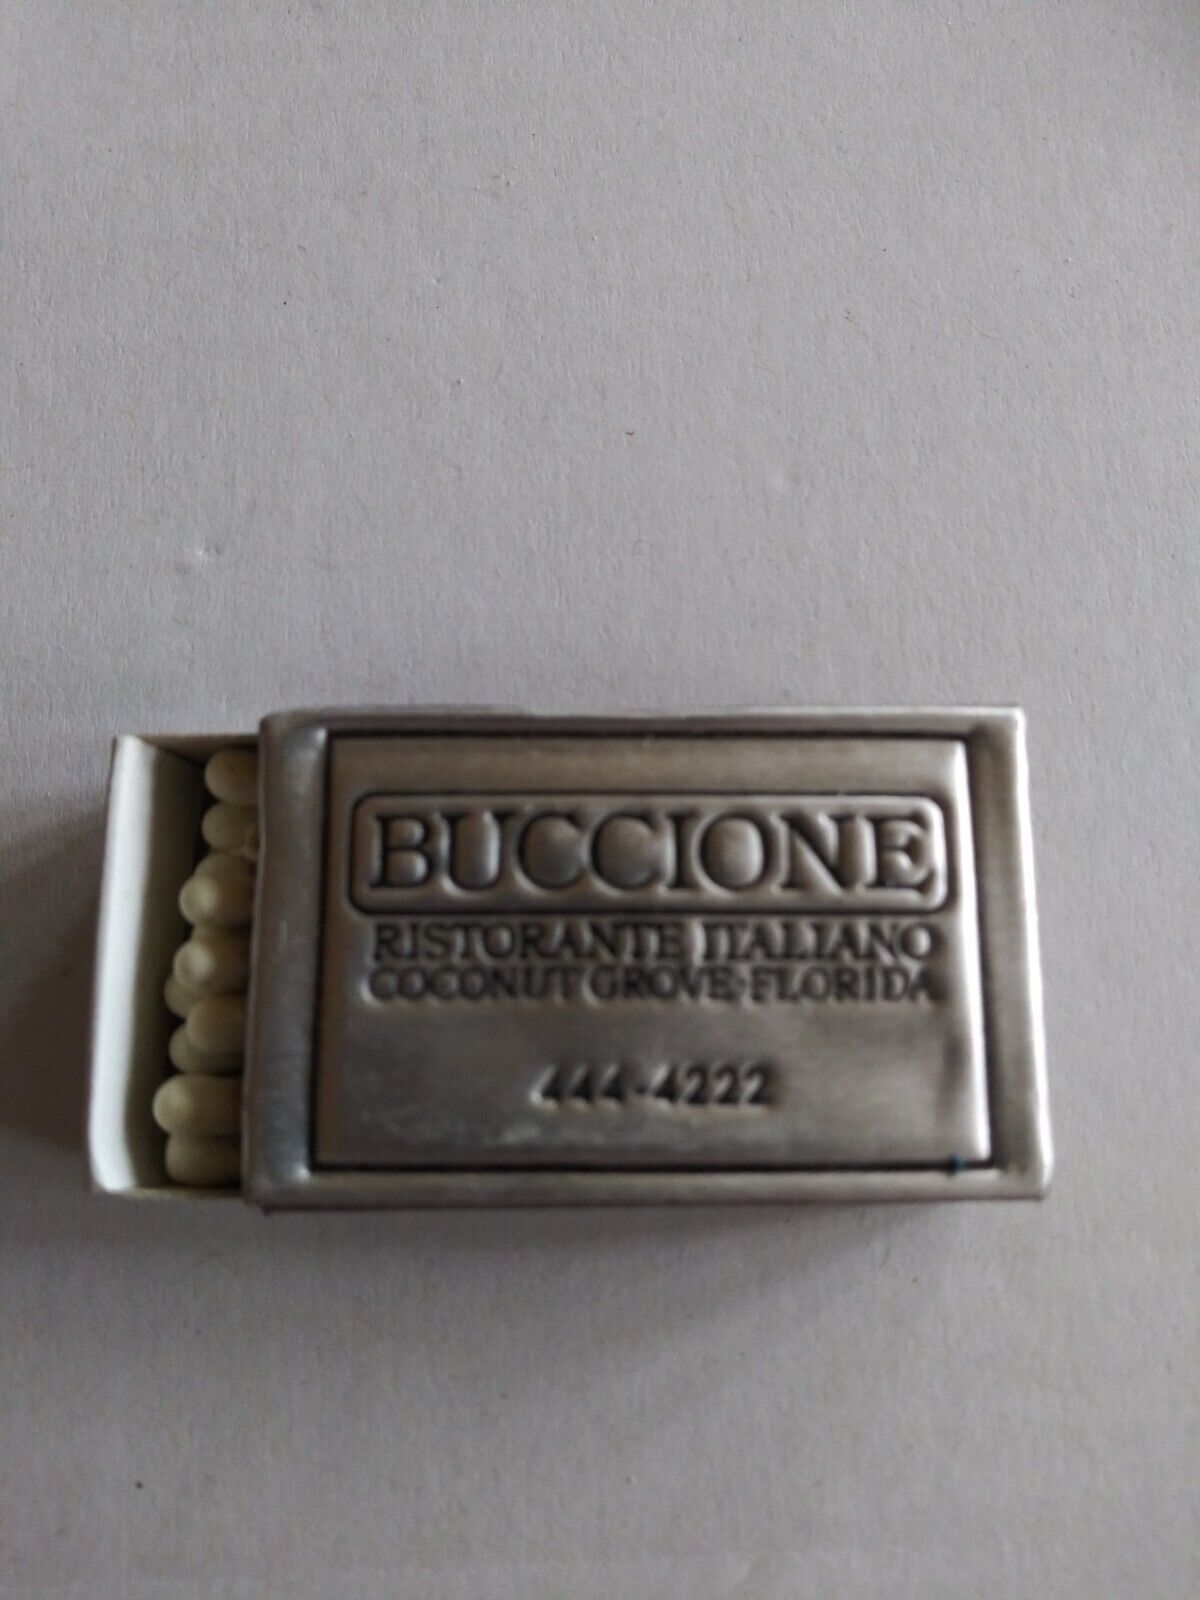 Vintage Wooden Matches From Buccione Italian Restaurant Coconut Grove Florida...